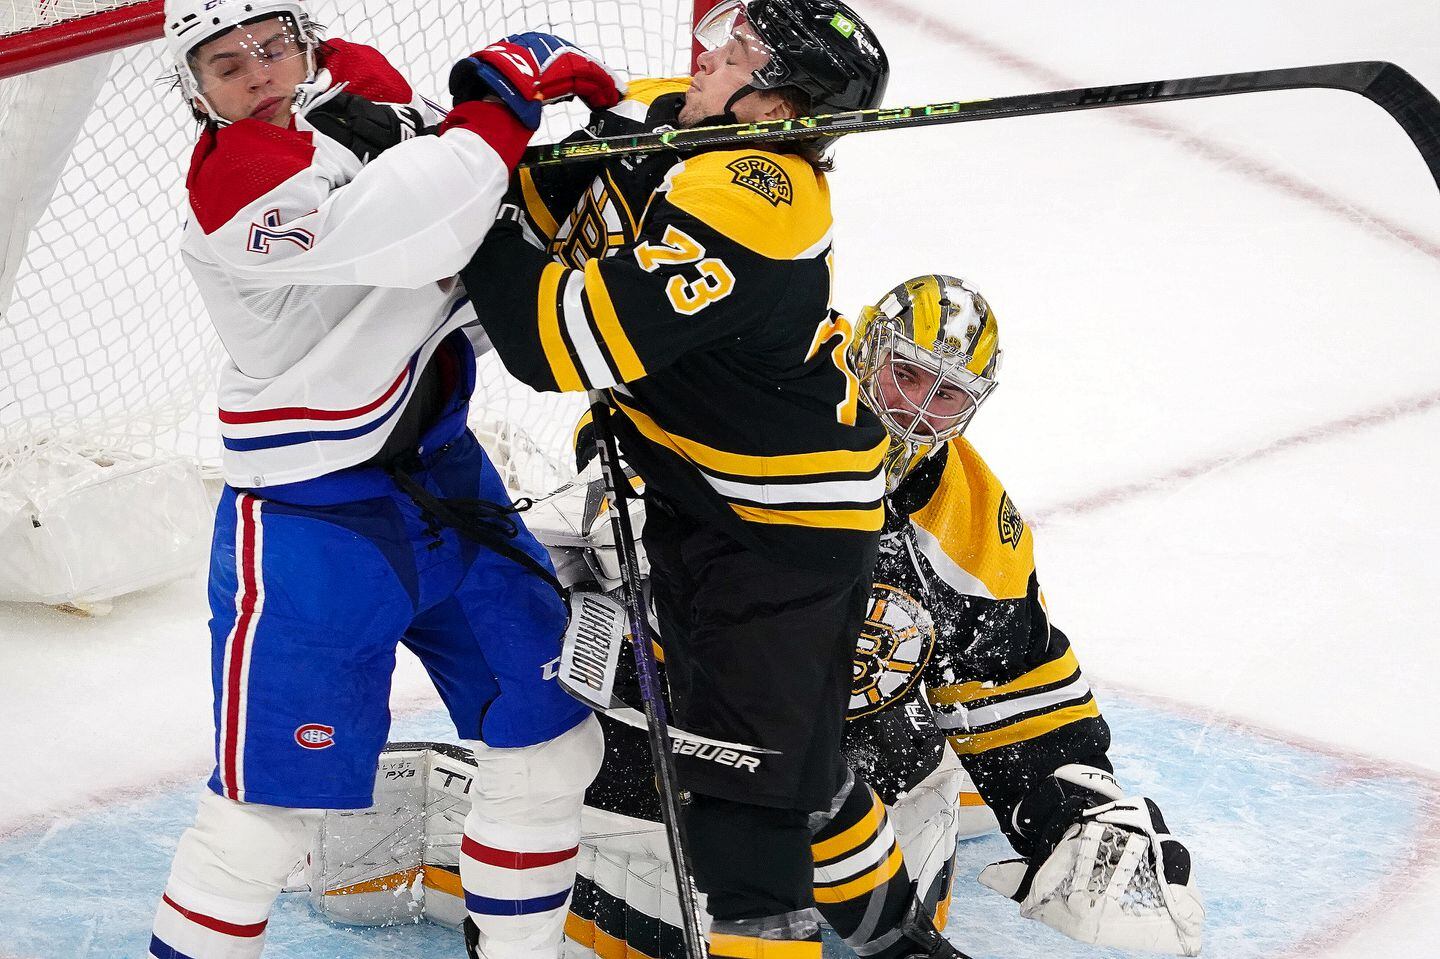 The Bruins will face the Canadiens in their home opener next season on Oct. 10.